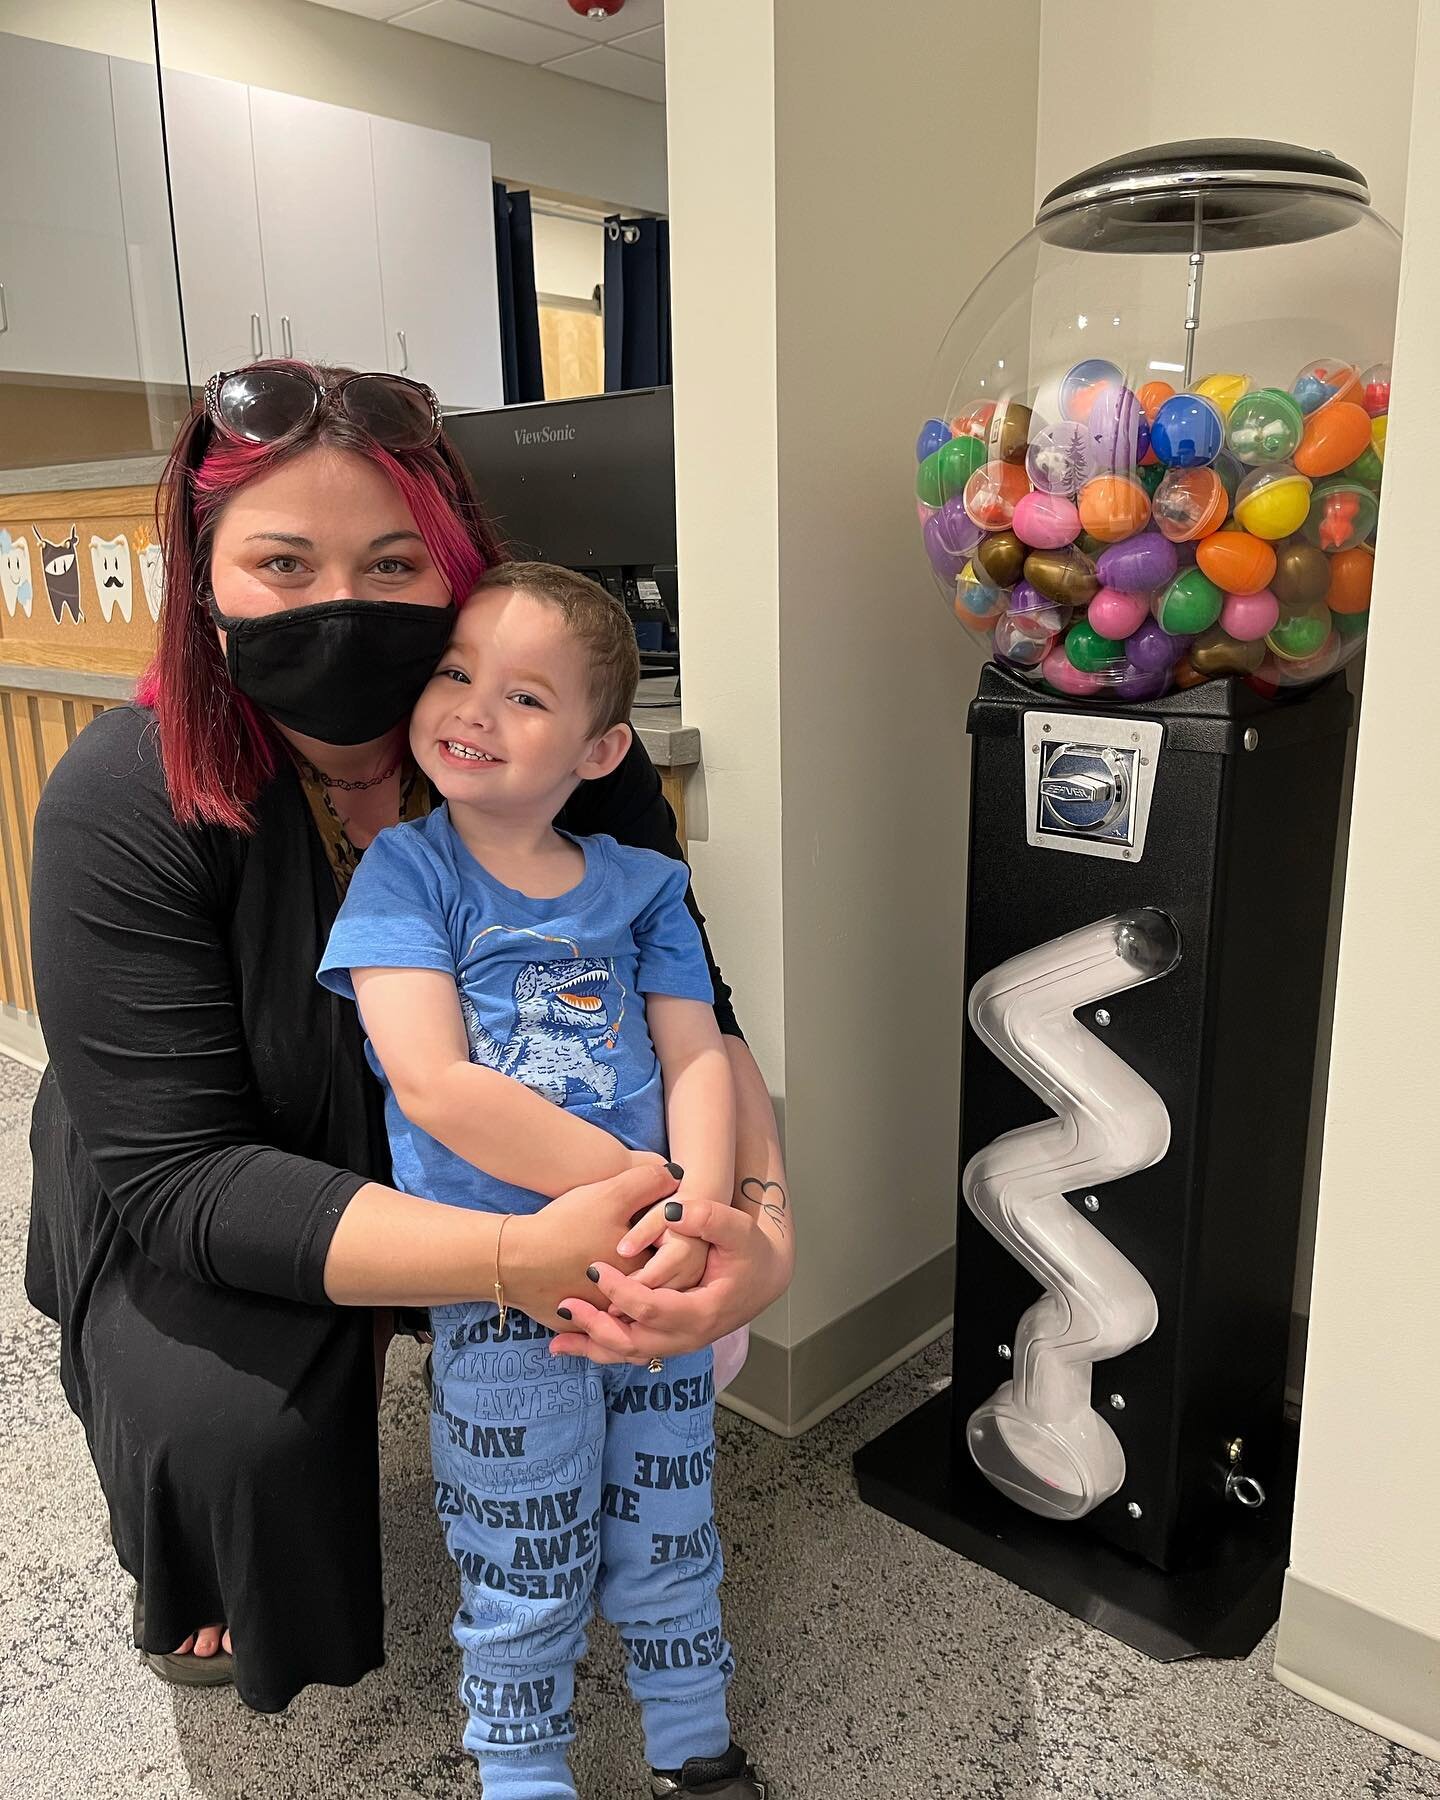 Our newest member of the &ldquo;No Sugar Bug Club&rdquo; had an awesome first dental visit! 

#cavityfree #pediatricdentistry #startup #saco #maine #thebestpatients #seeyouin6months